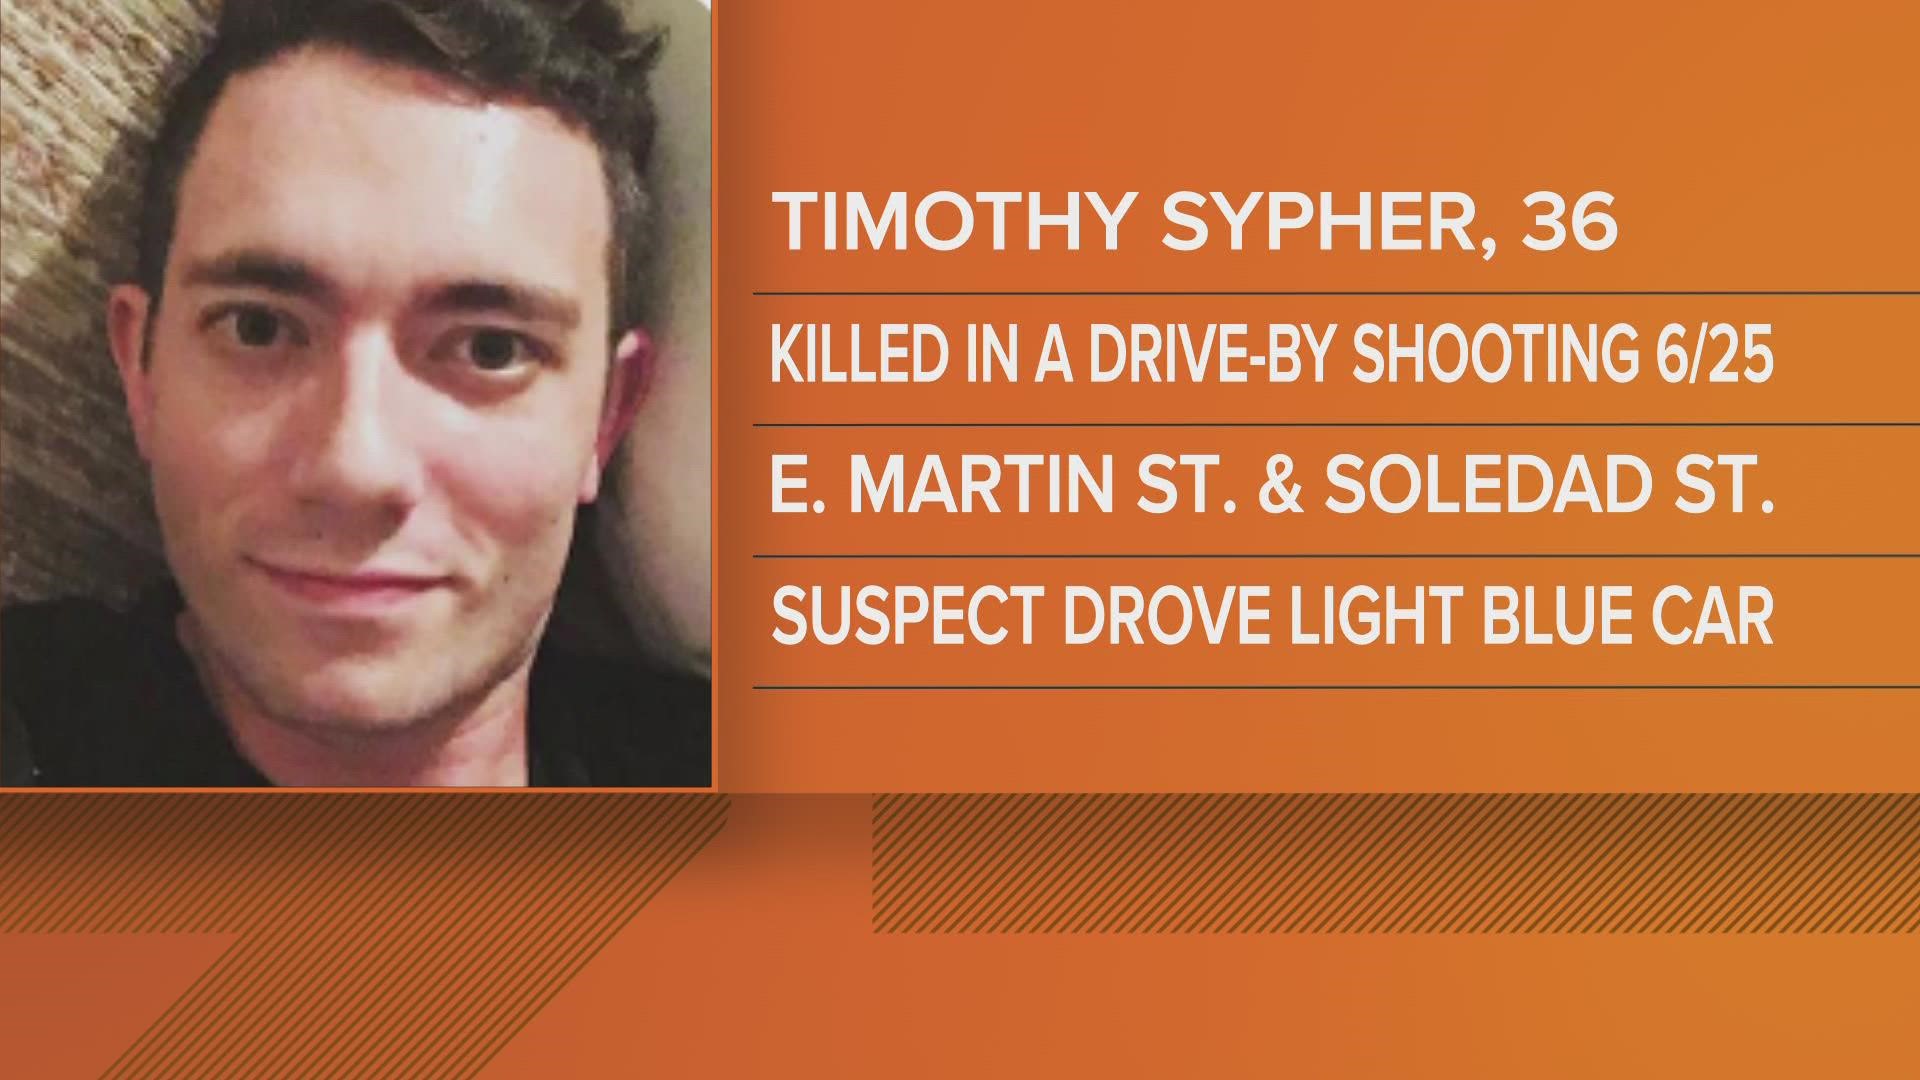 Police say 36-year-old Timothy Sypher was stopped at a red light when someone opened fire and killed him.